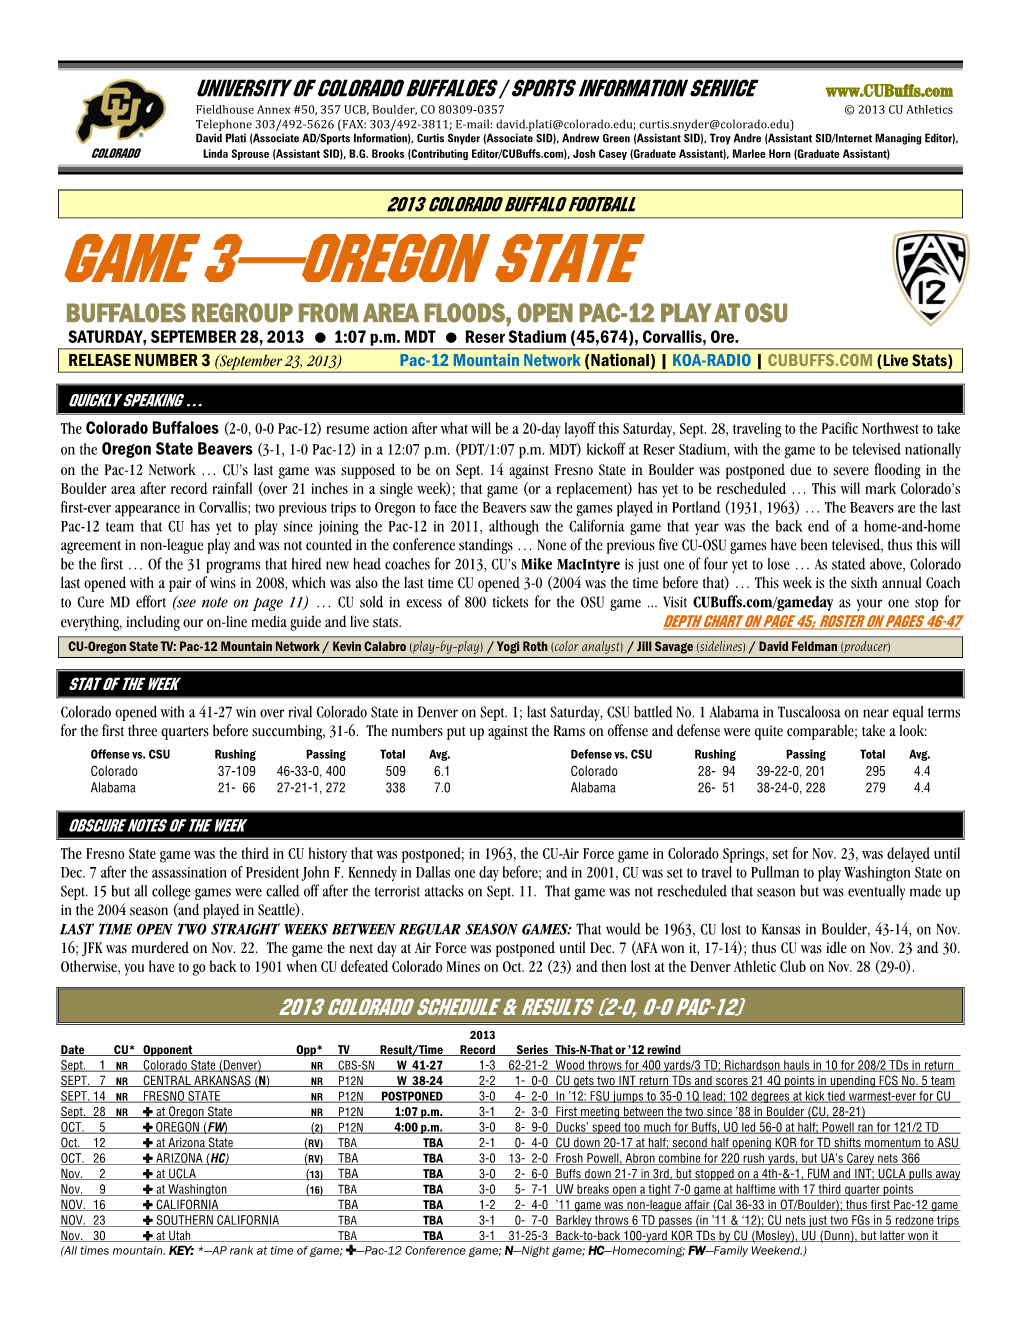 GAME 3—OREGON STATE BUFFALOES REGROUP from AREA FLOODS, OPEN PAC-12 PLAY at OSU SATURDAY, SEPTEMBER 28, 2013 1:07 P.M